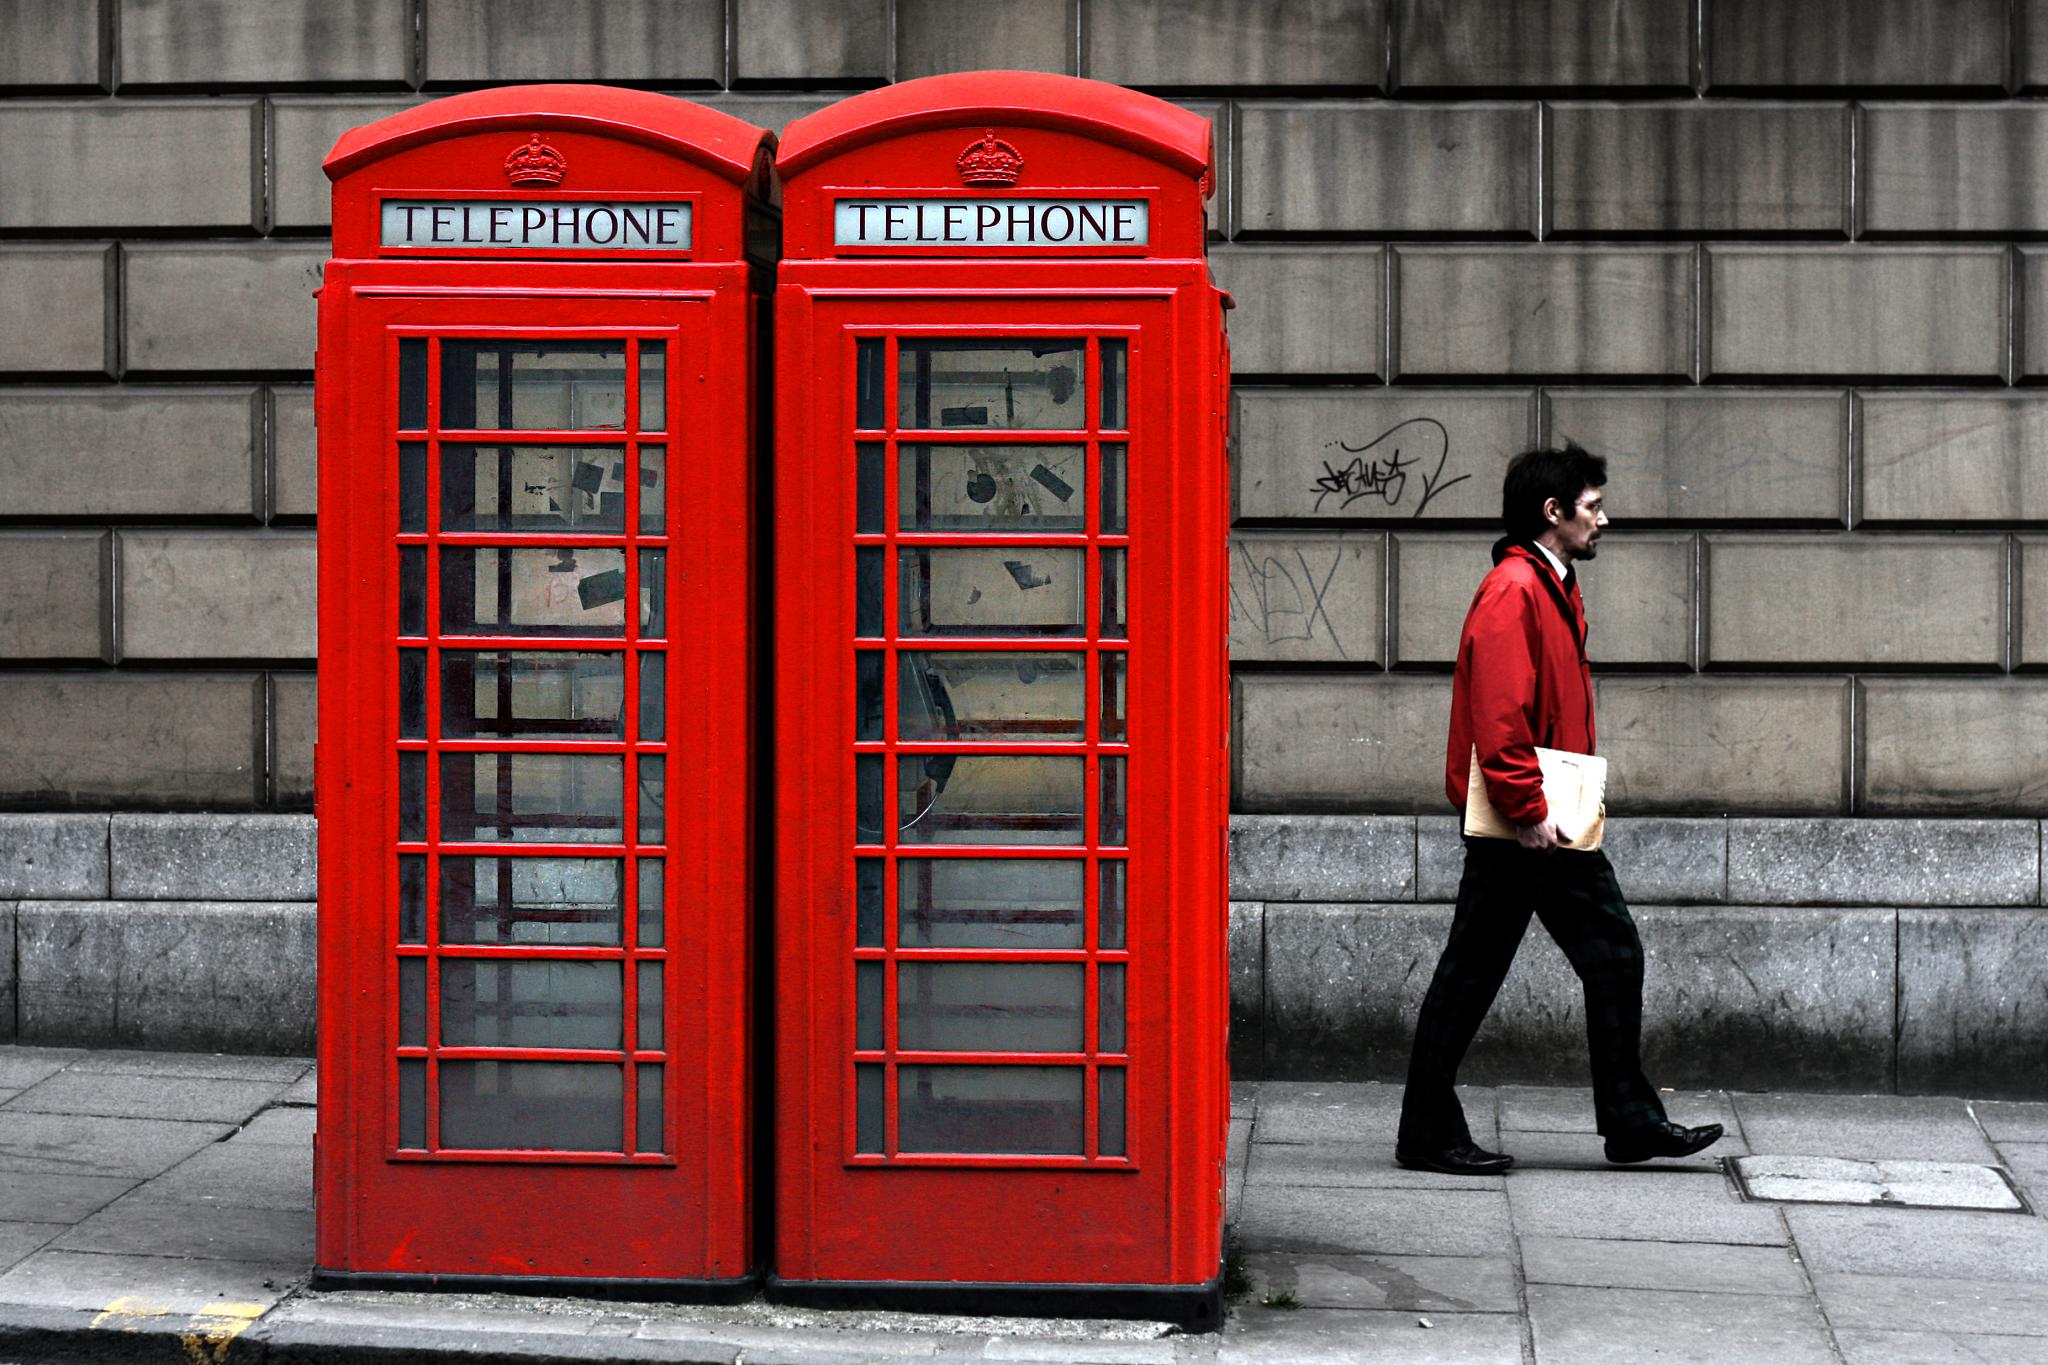 Wallpaper telephone booth red payphone public space telephony city outdoor structure door street facade x